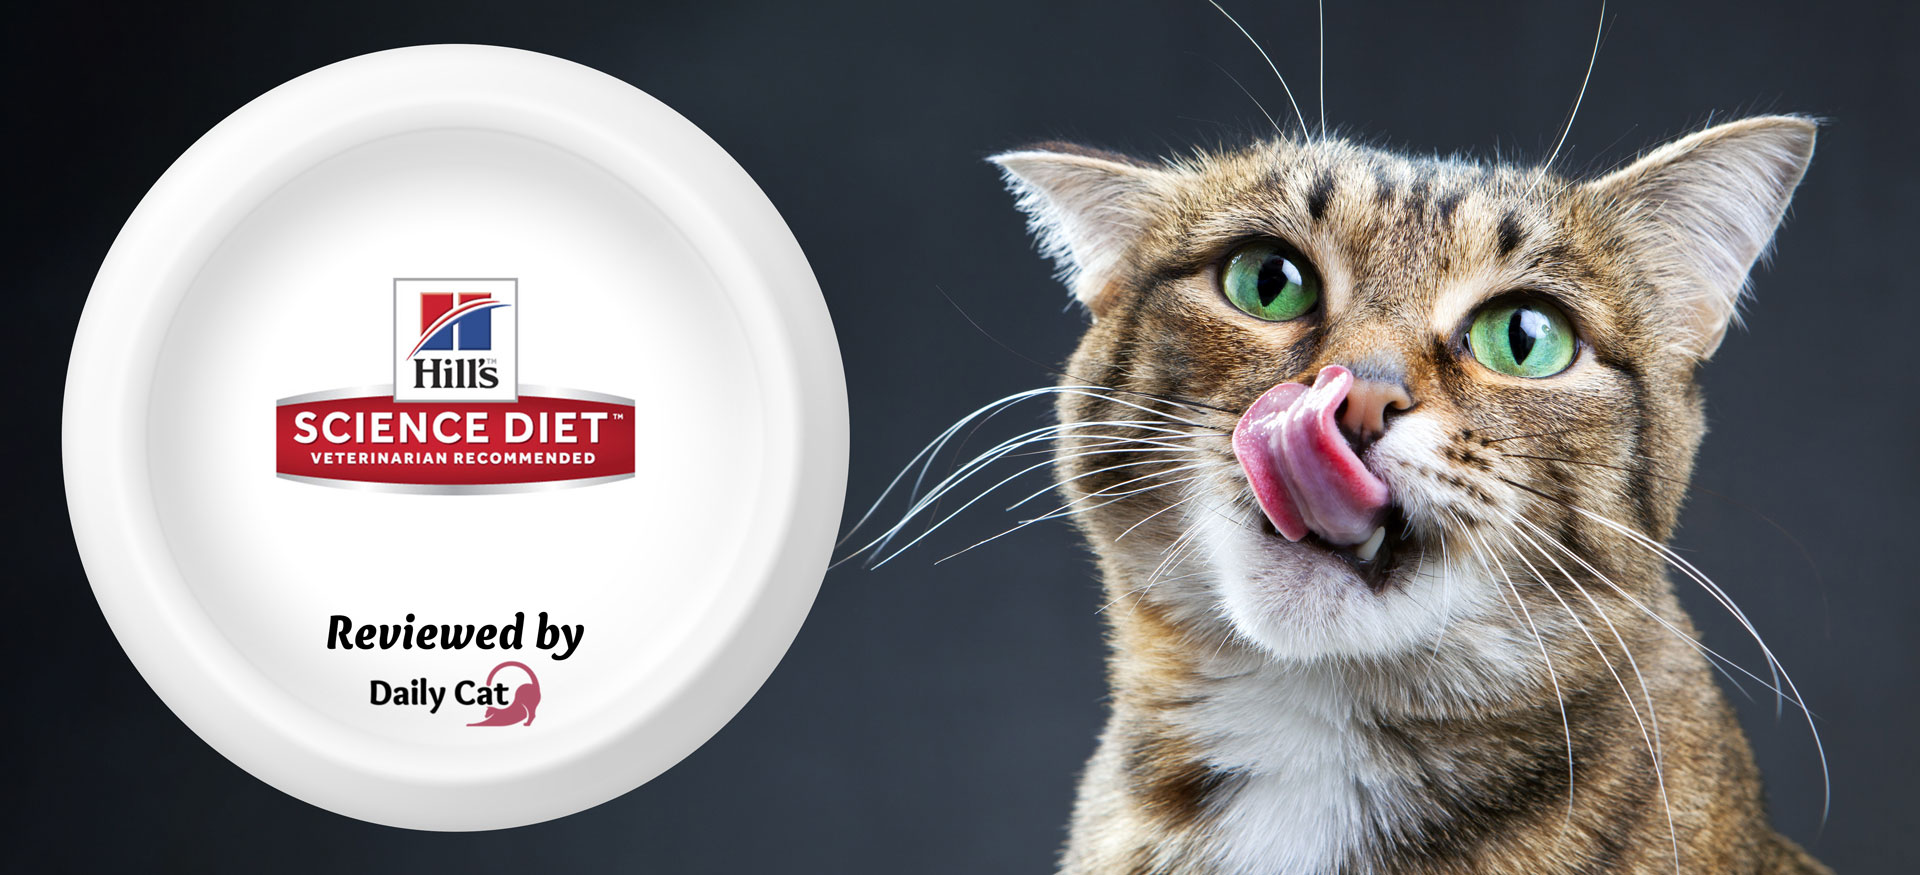 dailycat brand review science diet